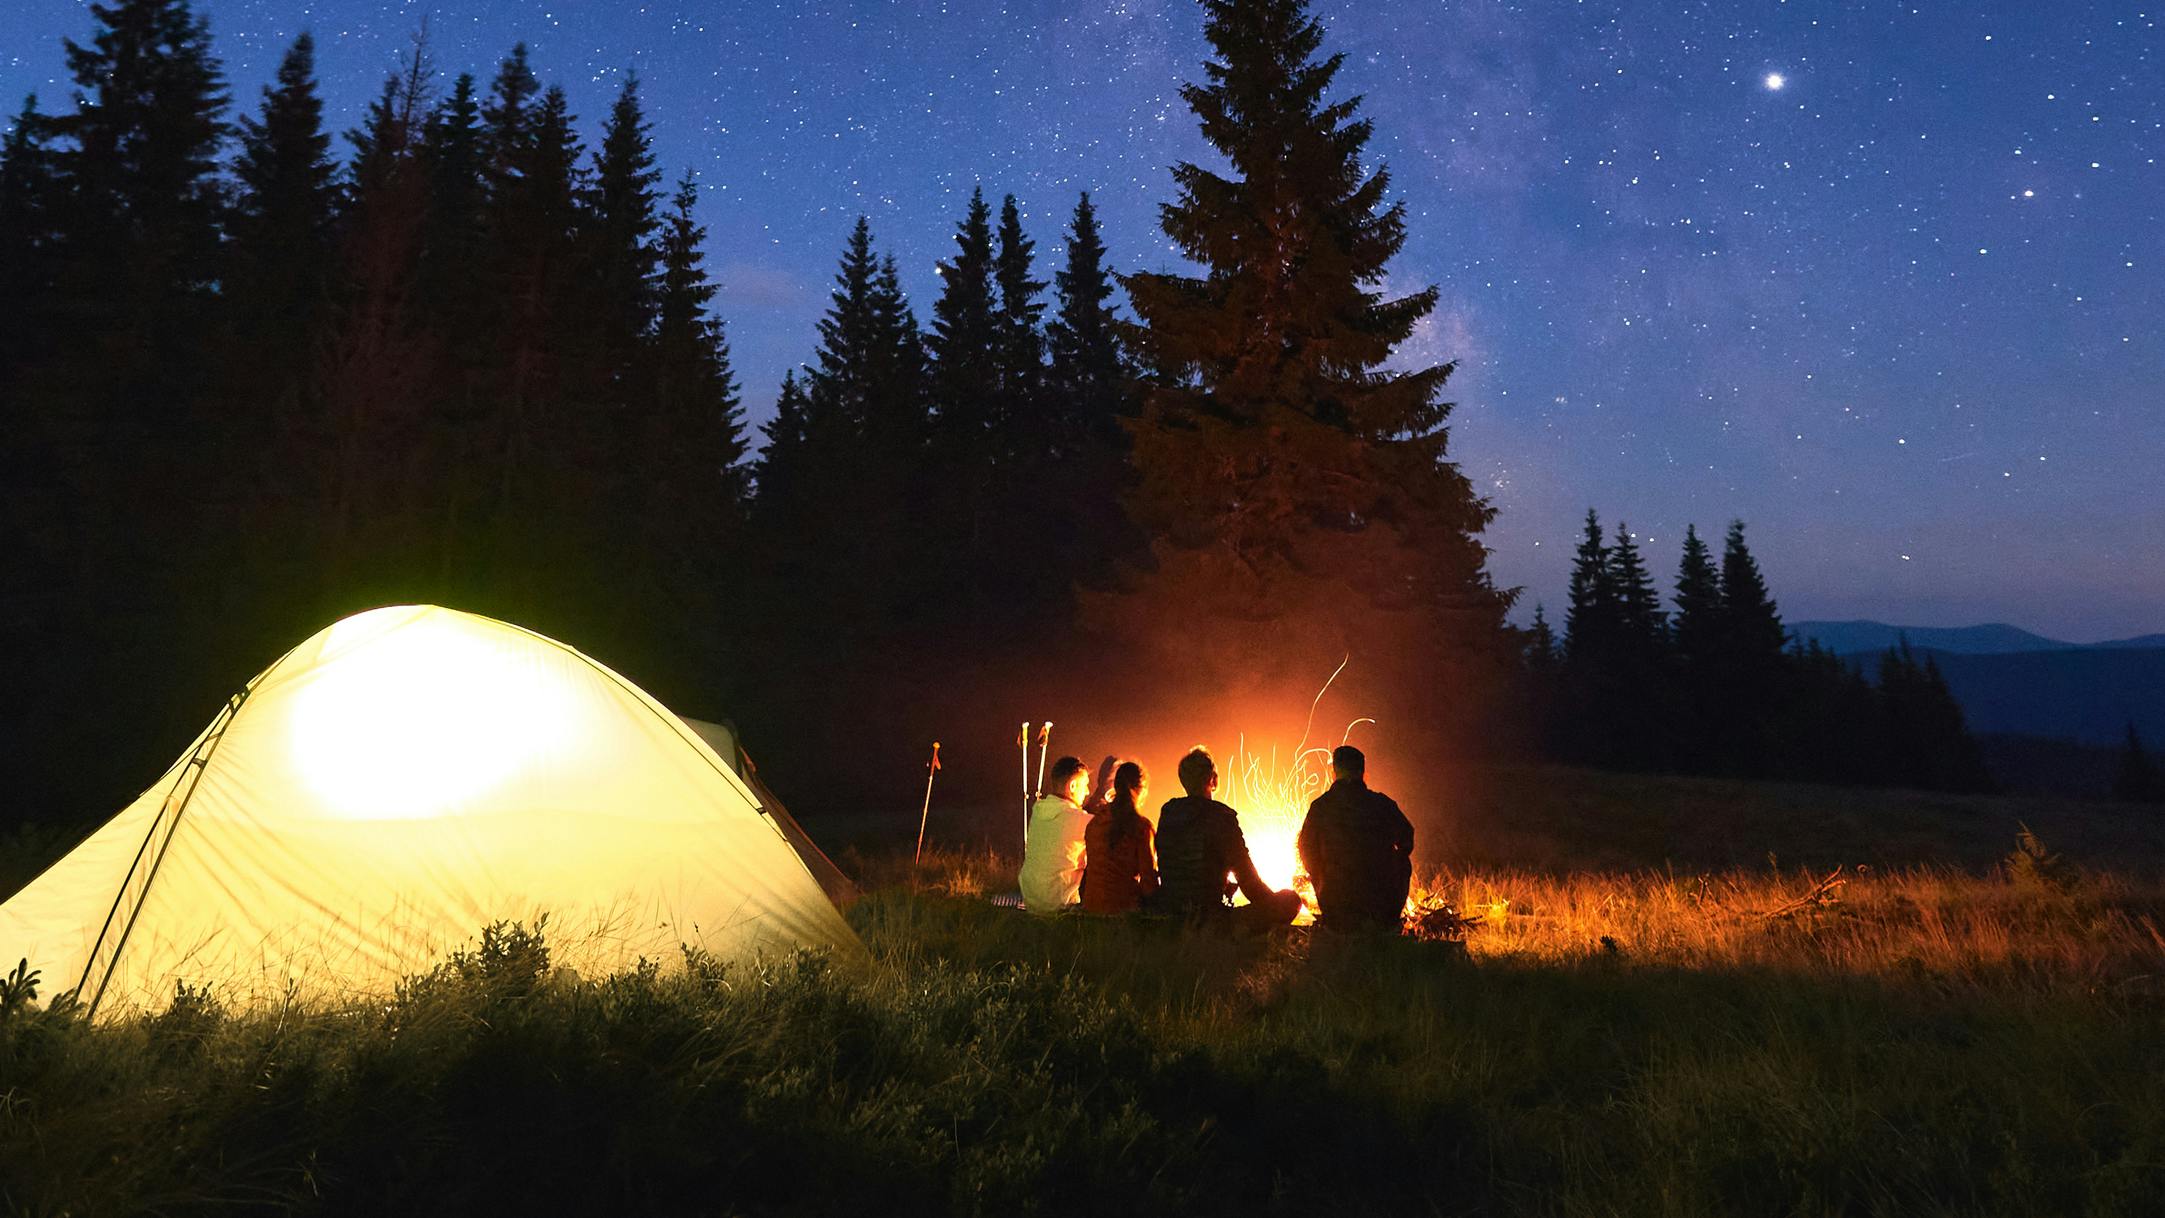 A group of people gather around a campfire at night while a tent glows behind them